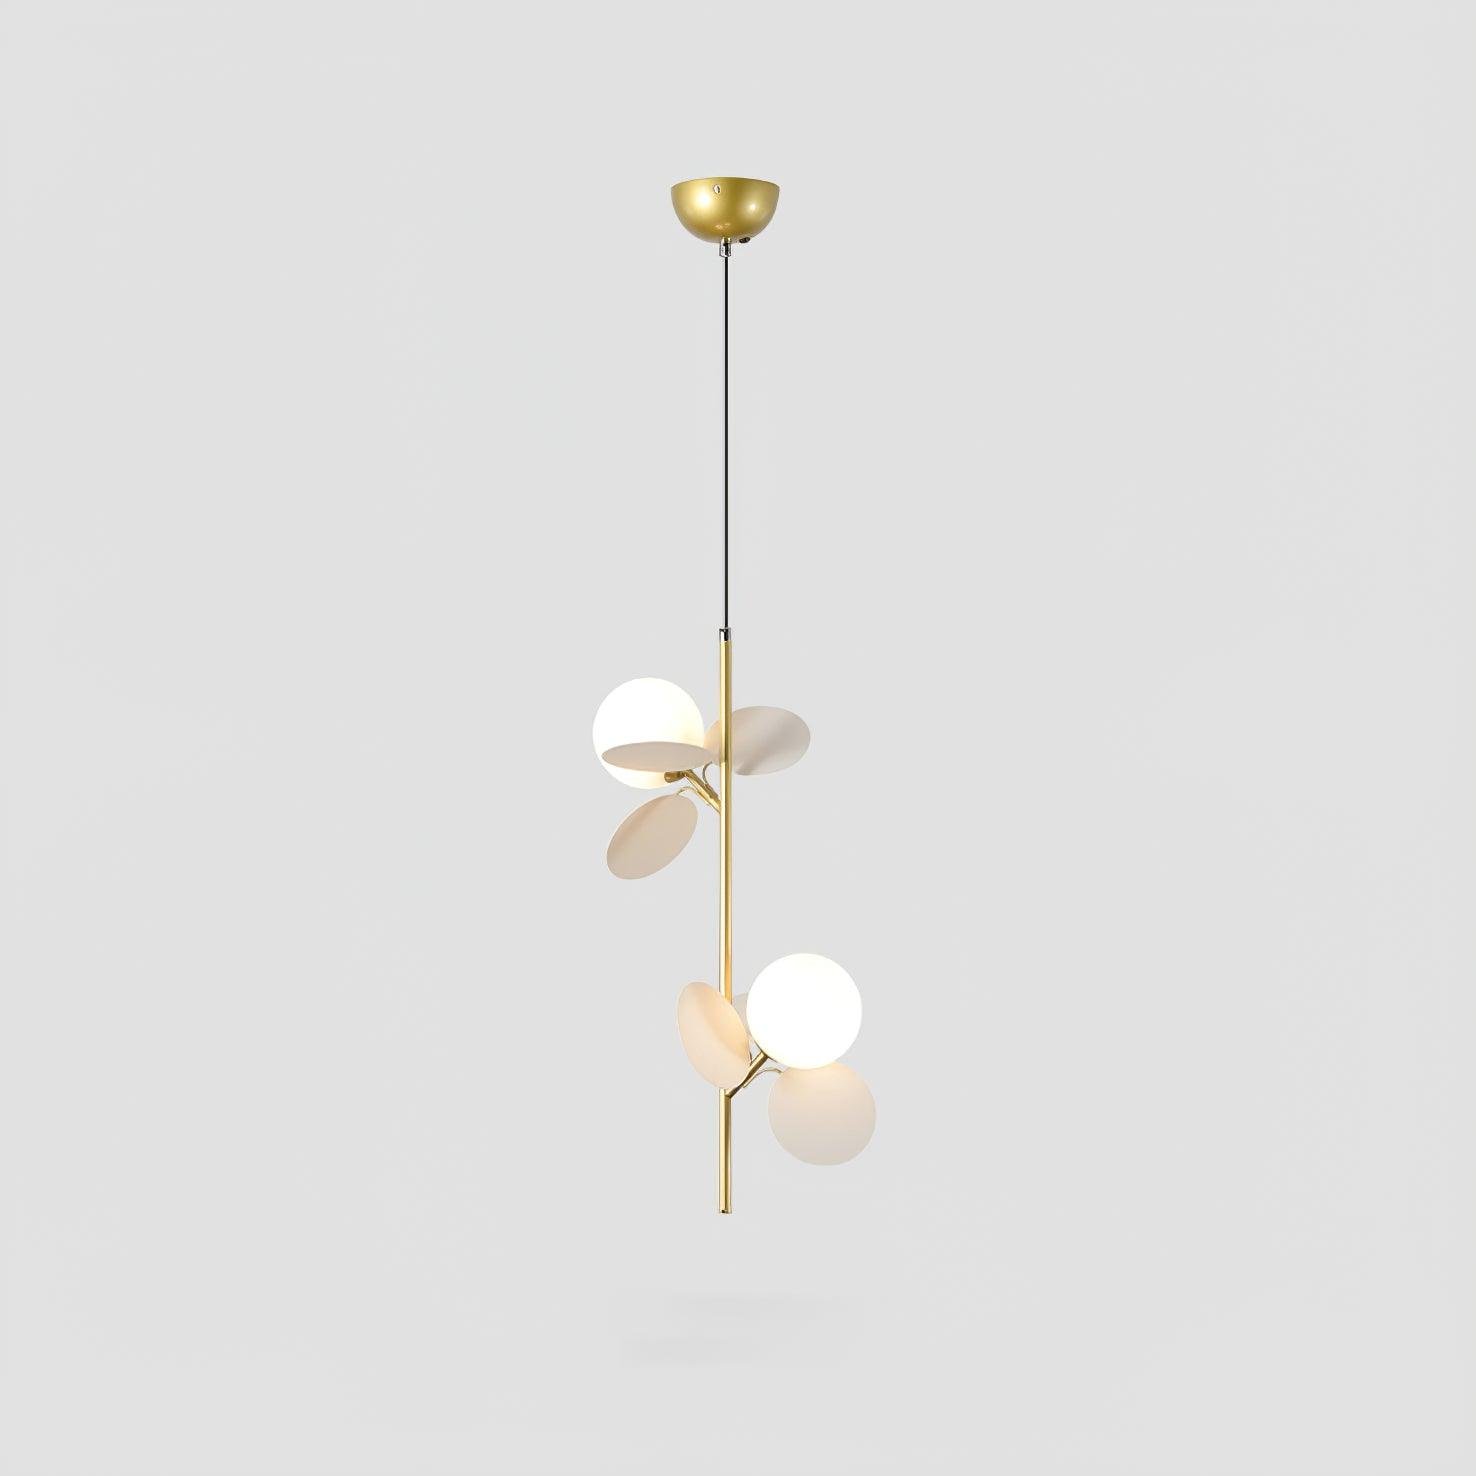 Blanca pendant light in gold and white, with a diameter of 7.9 inches (20cm) and a height of 20.5 inches (52cm).